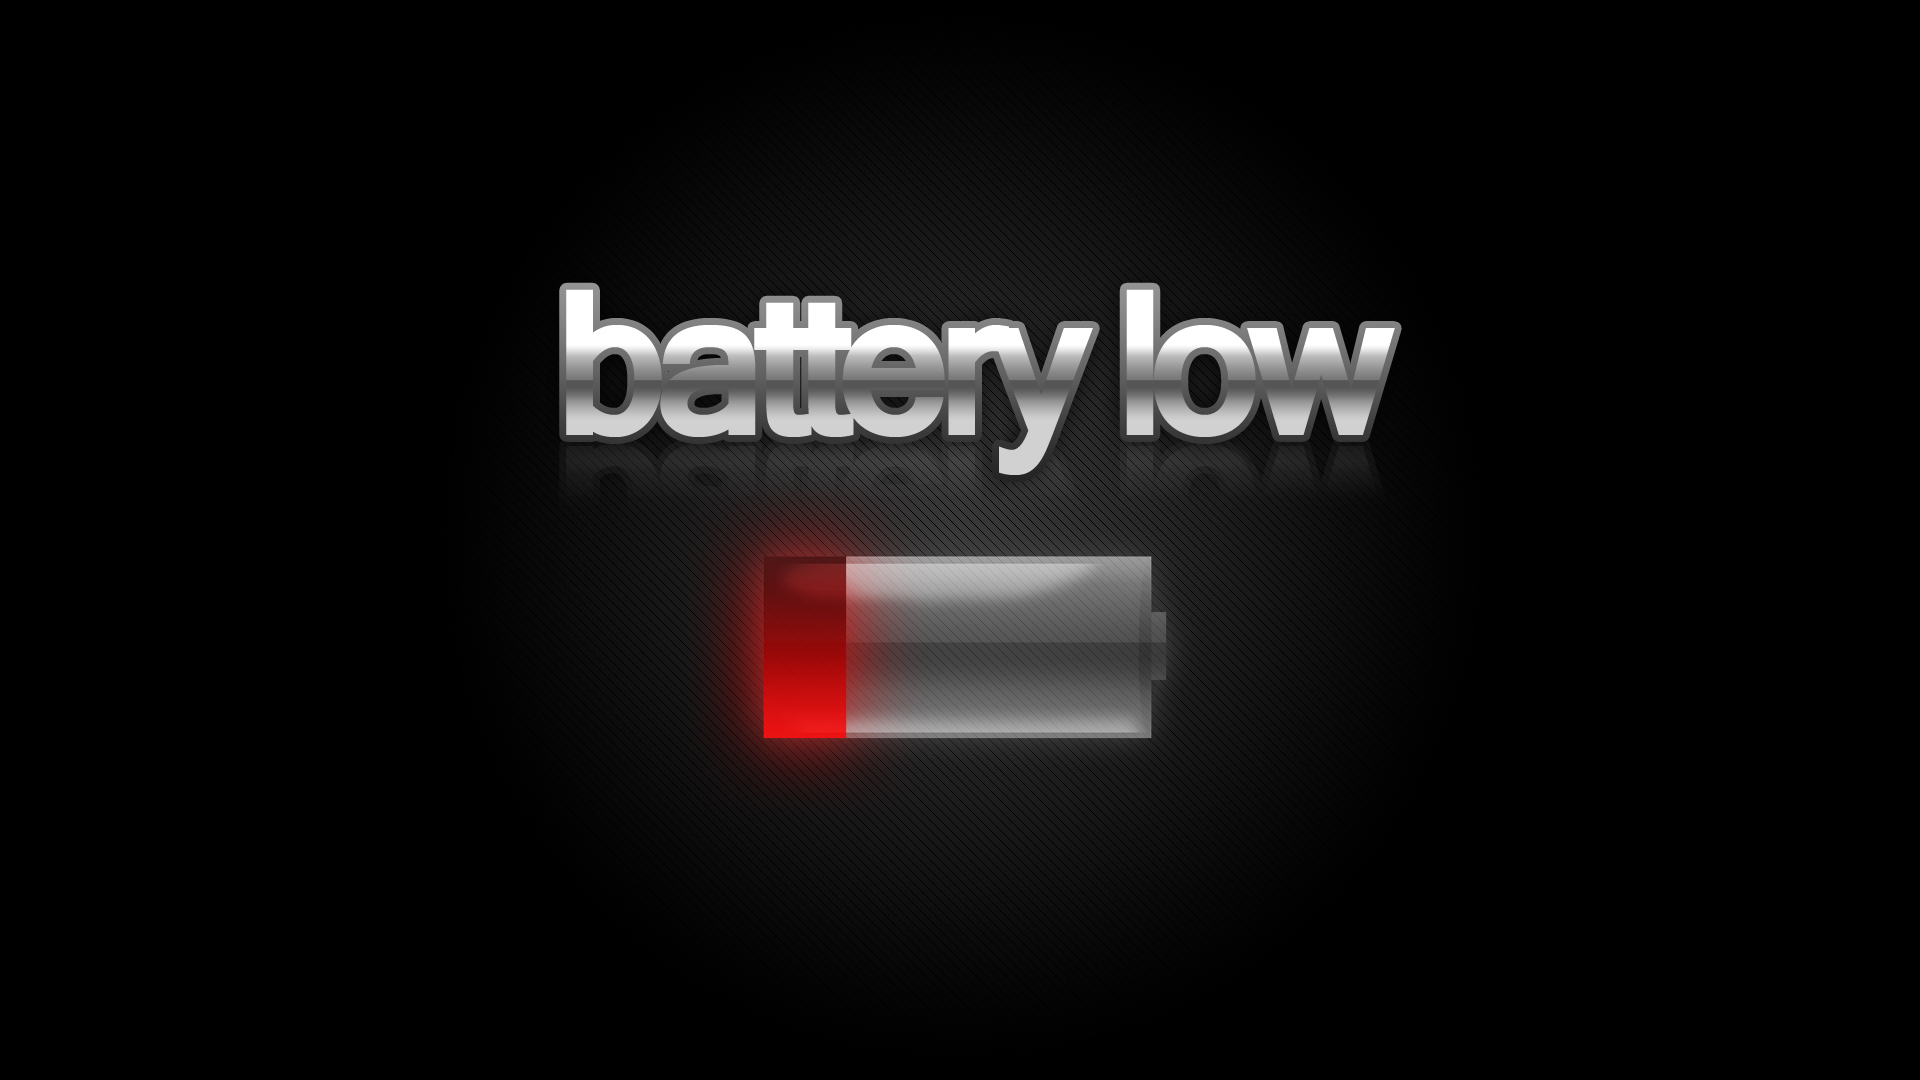 Since 2000 have occurred with batteries of phones?